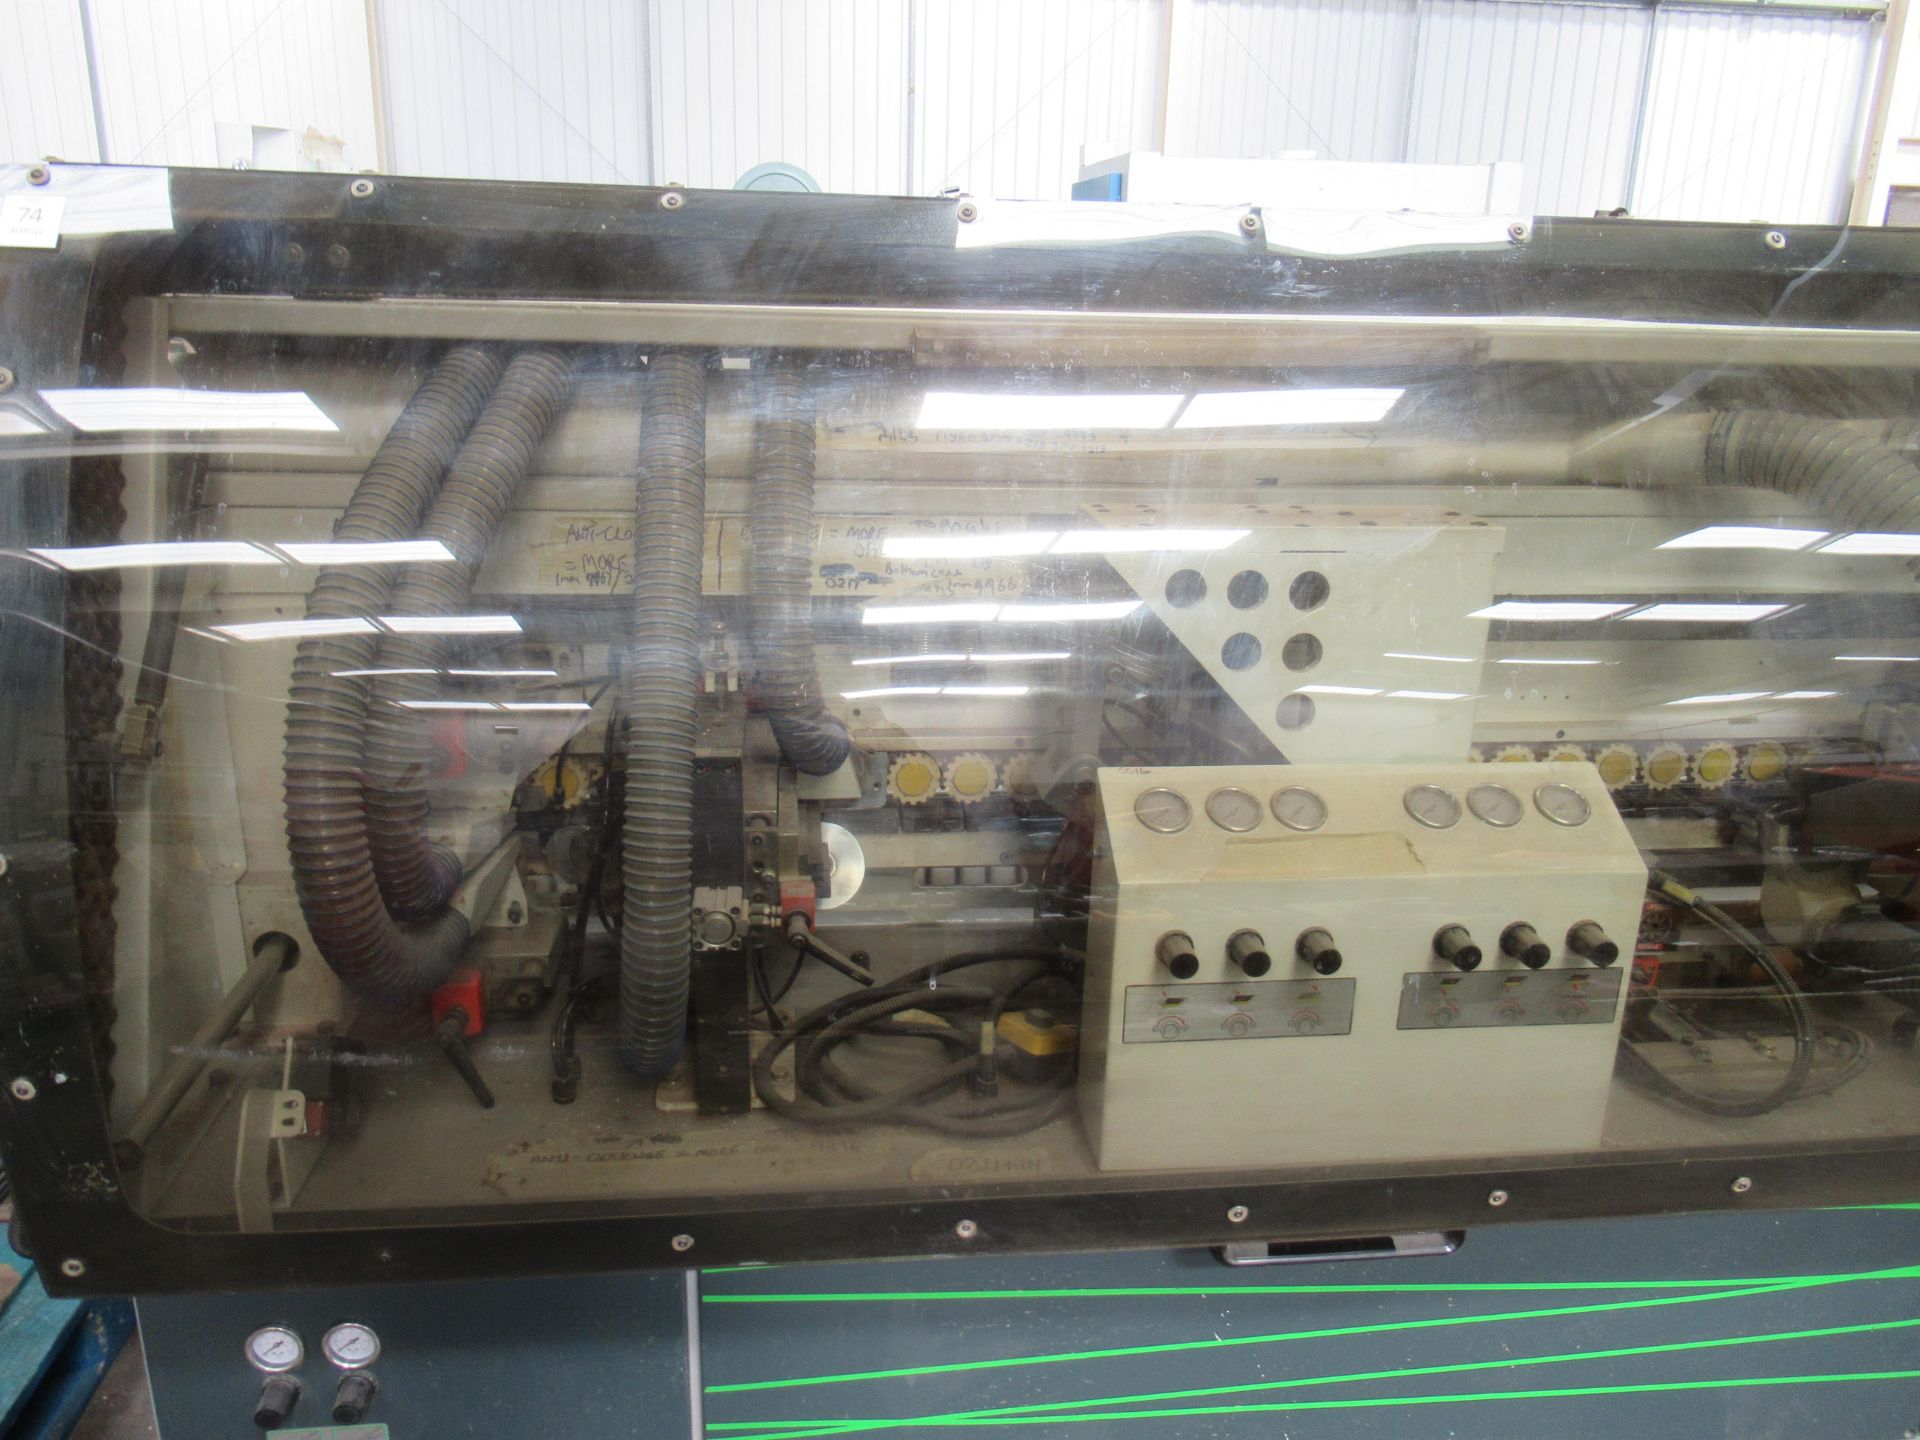 Lohmeyer KAM775NP IQ Edgebander 3PH. Please note there is a £25 plus VAT Lift Out Fee on this lot - Image 2 of 4